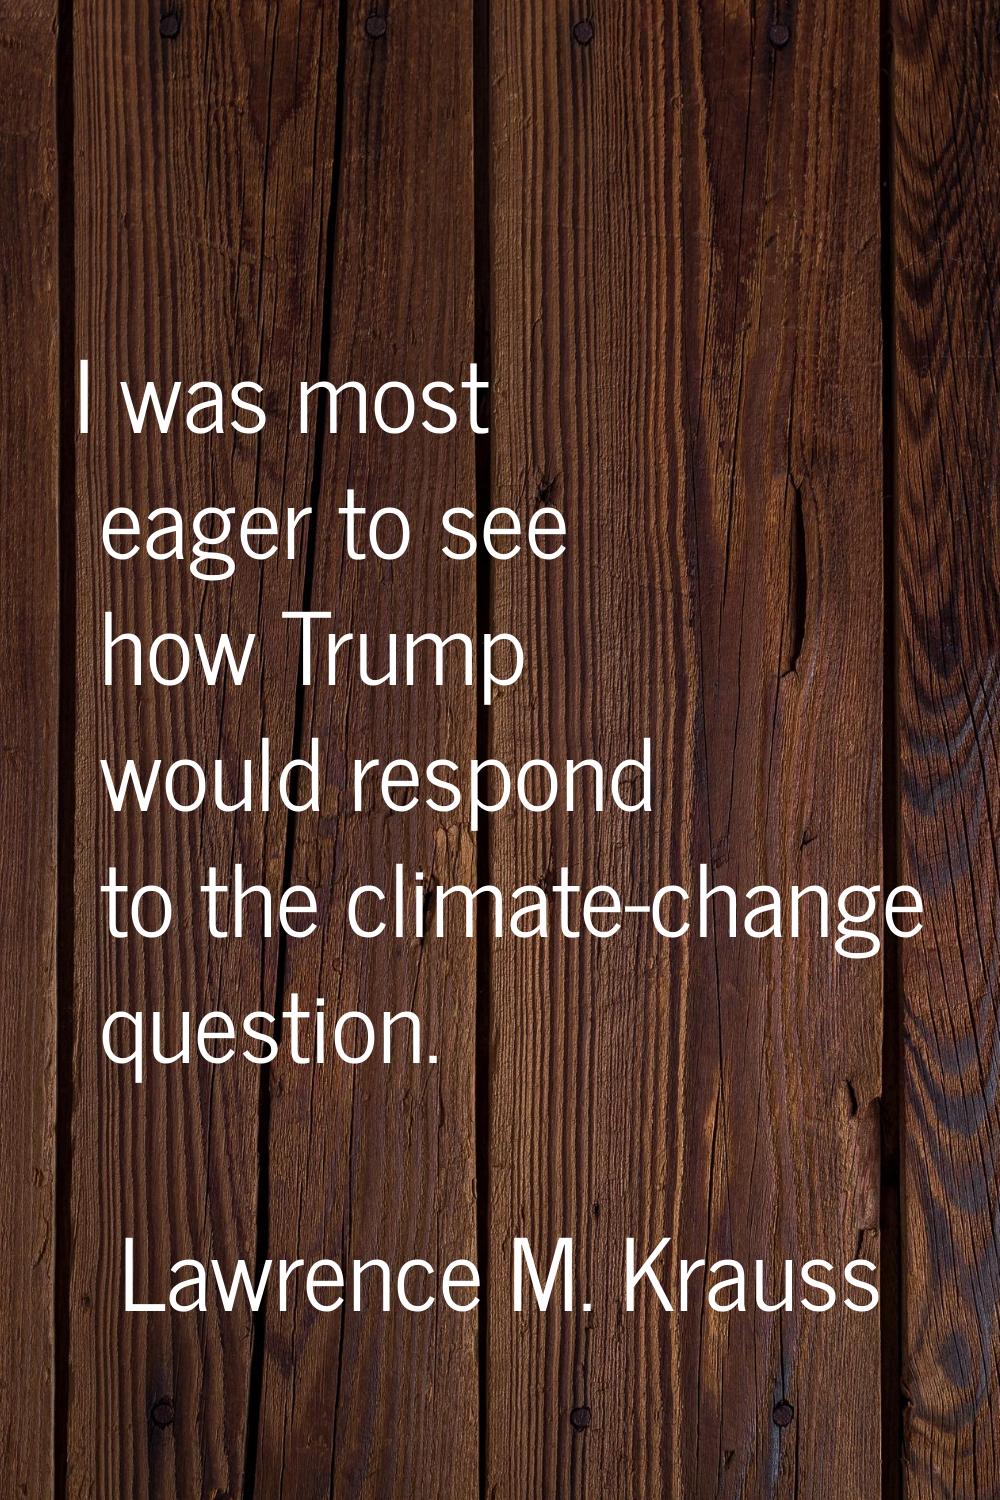 I was most eager to see how Trump would respond to the climate-change question.